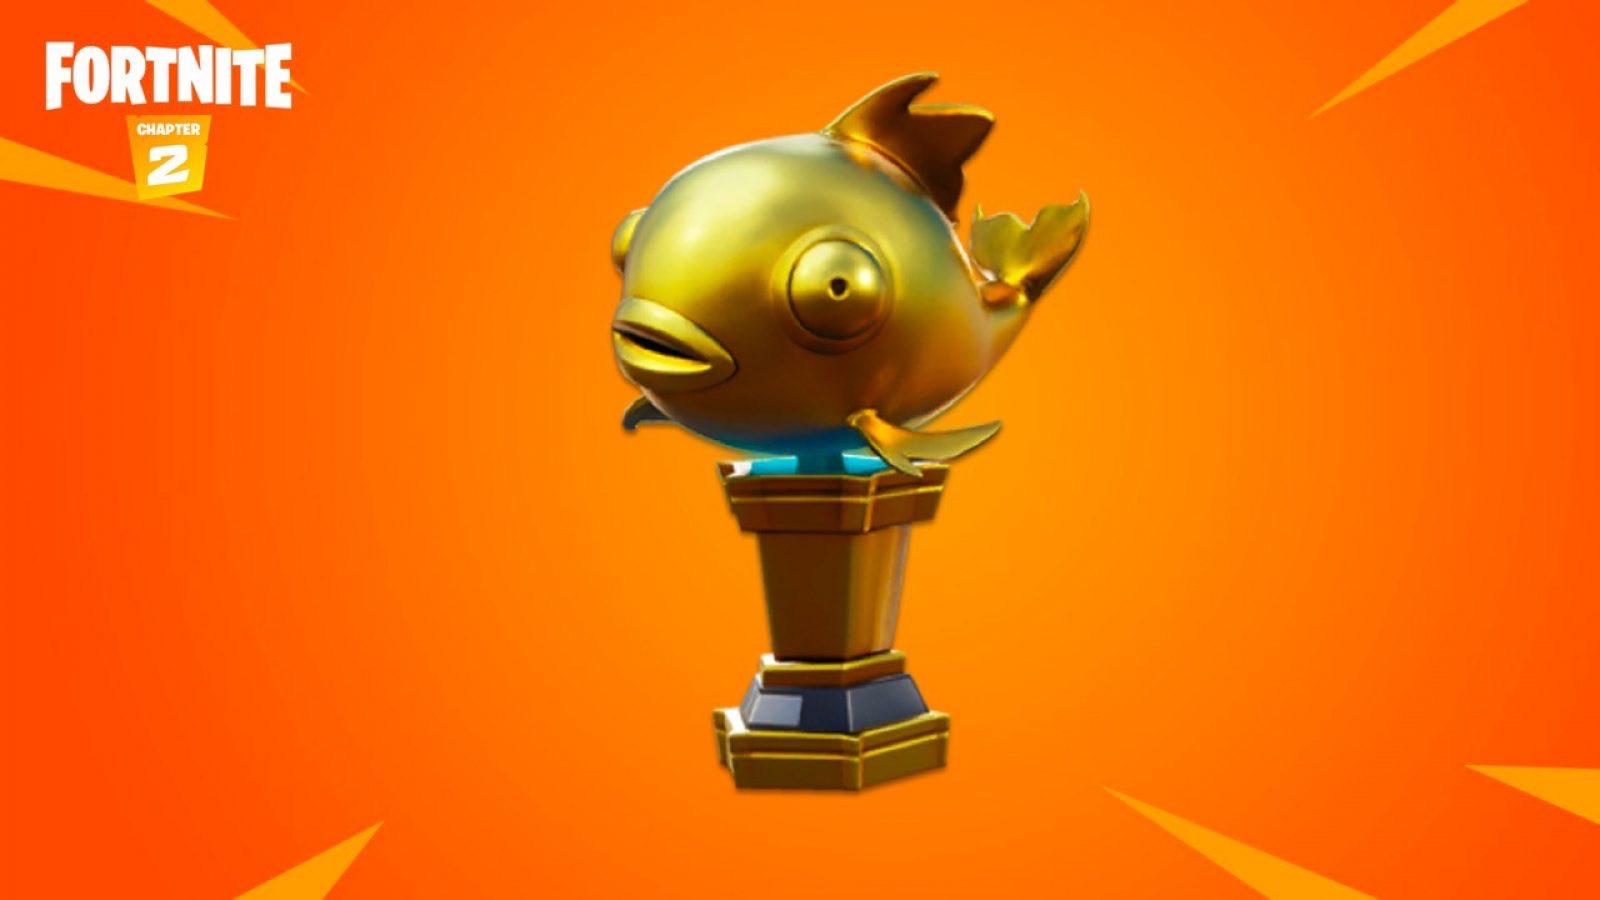 Fishsticks should get a gold style when you catch the mythic fish